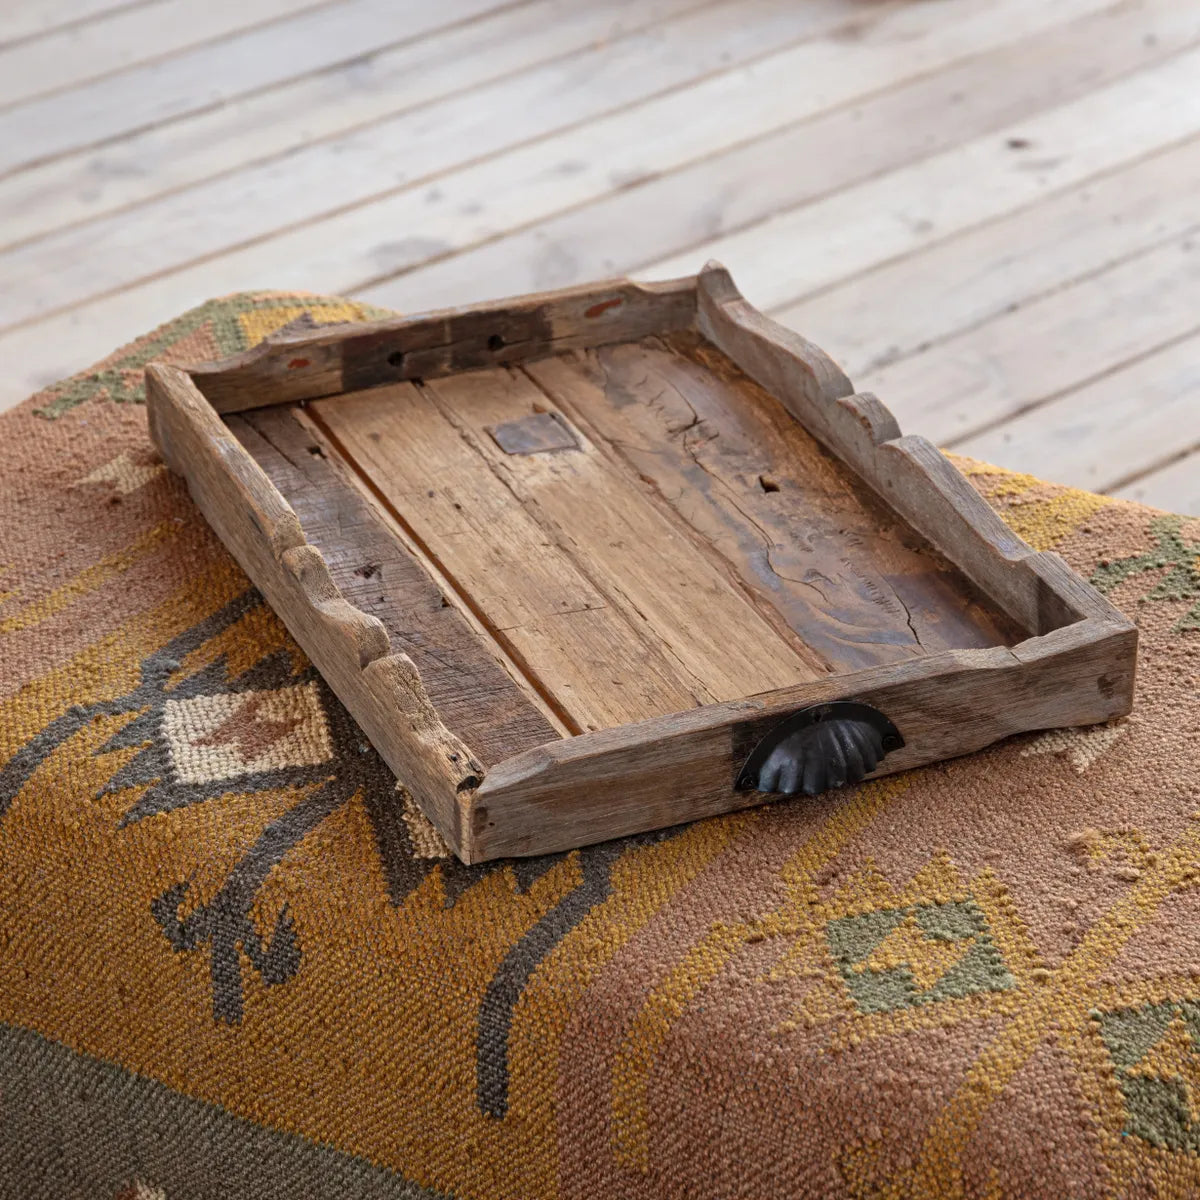 SCALLOPED TRAY OF RUSTIC WOOD WITH IRON HANDLES